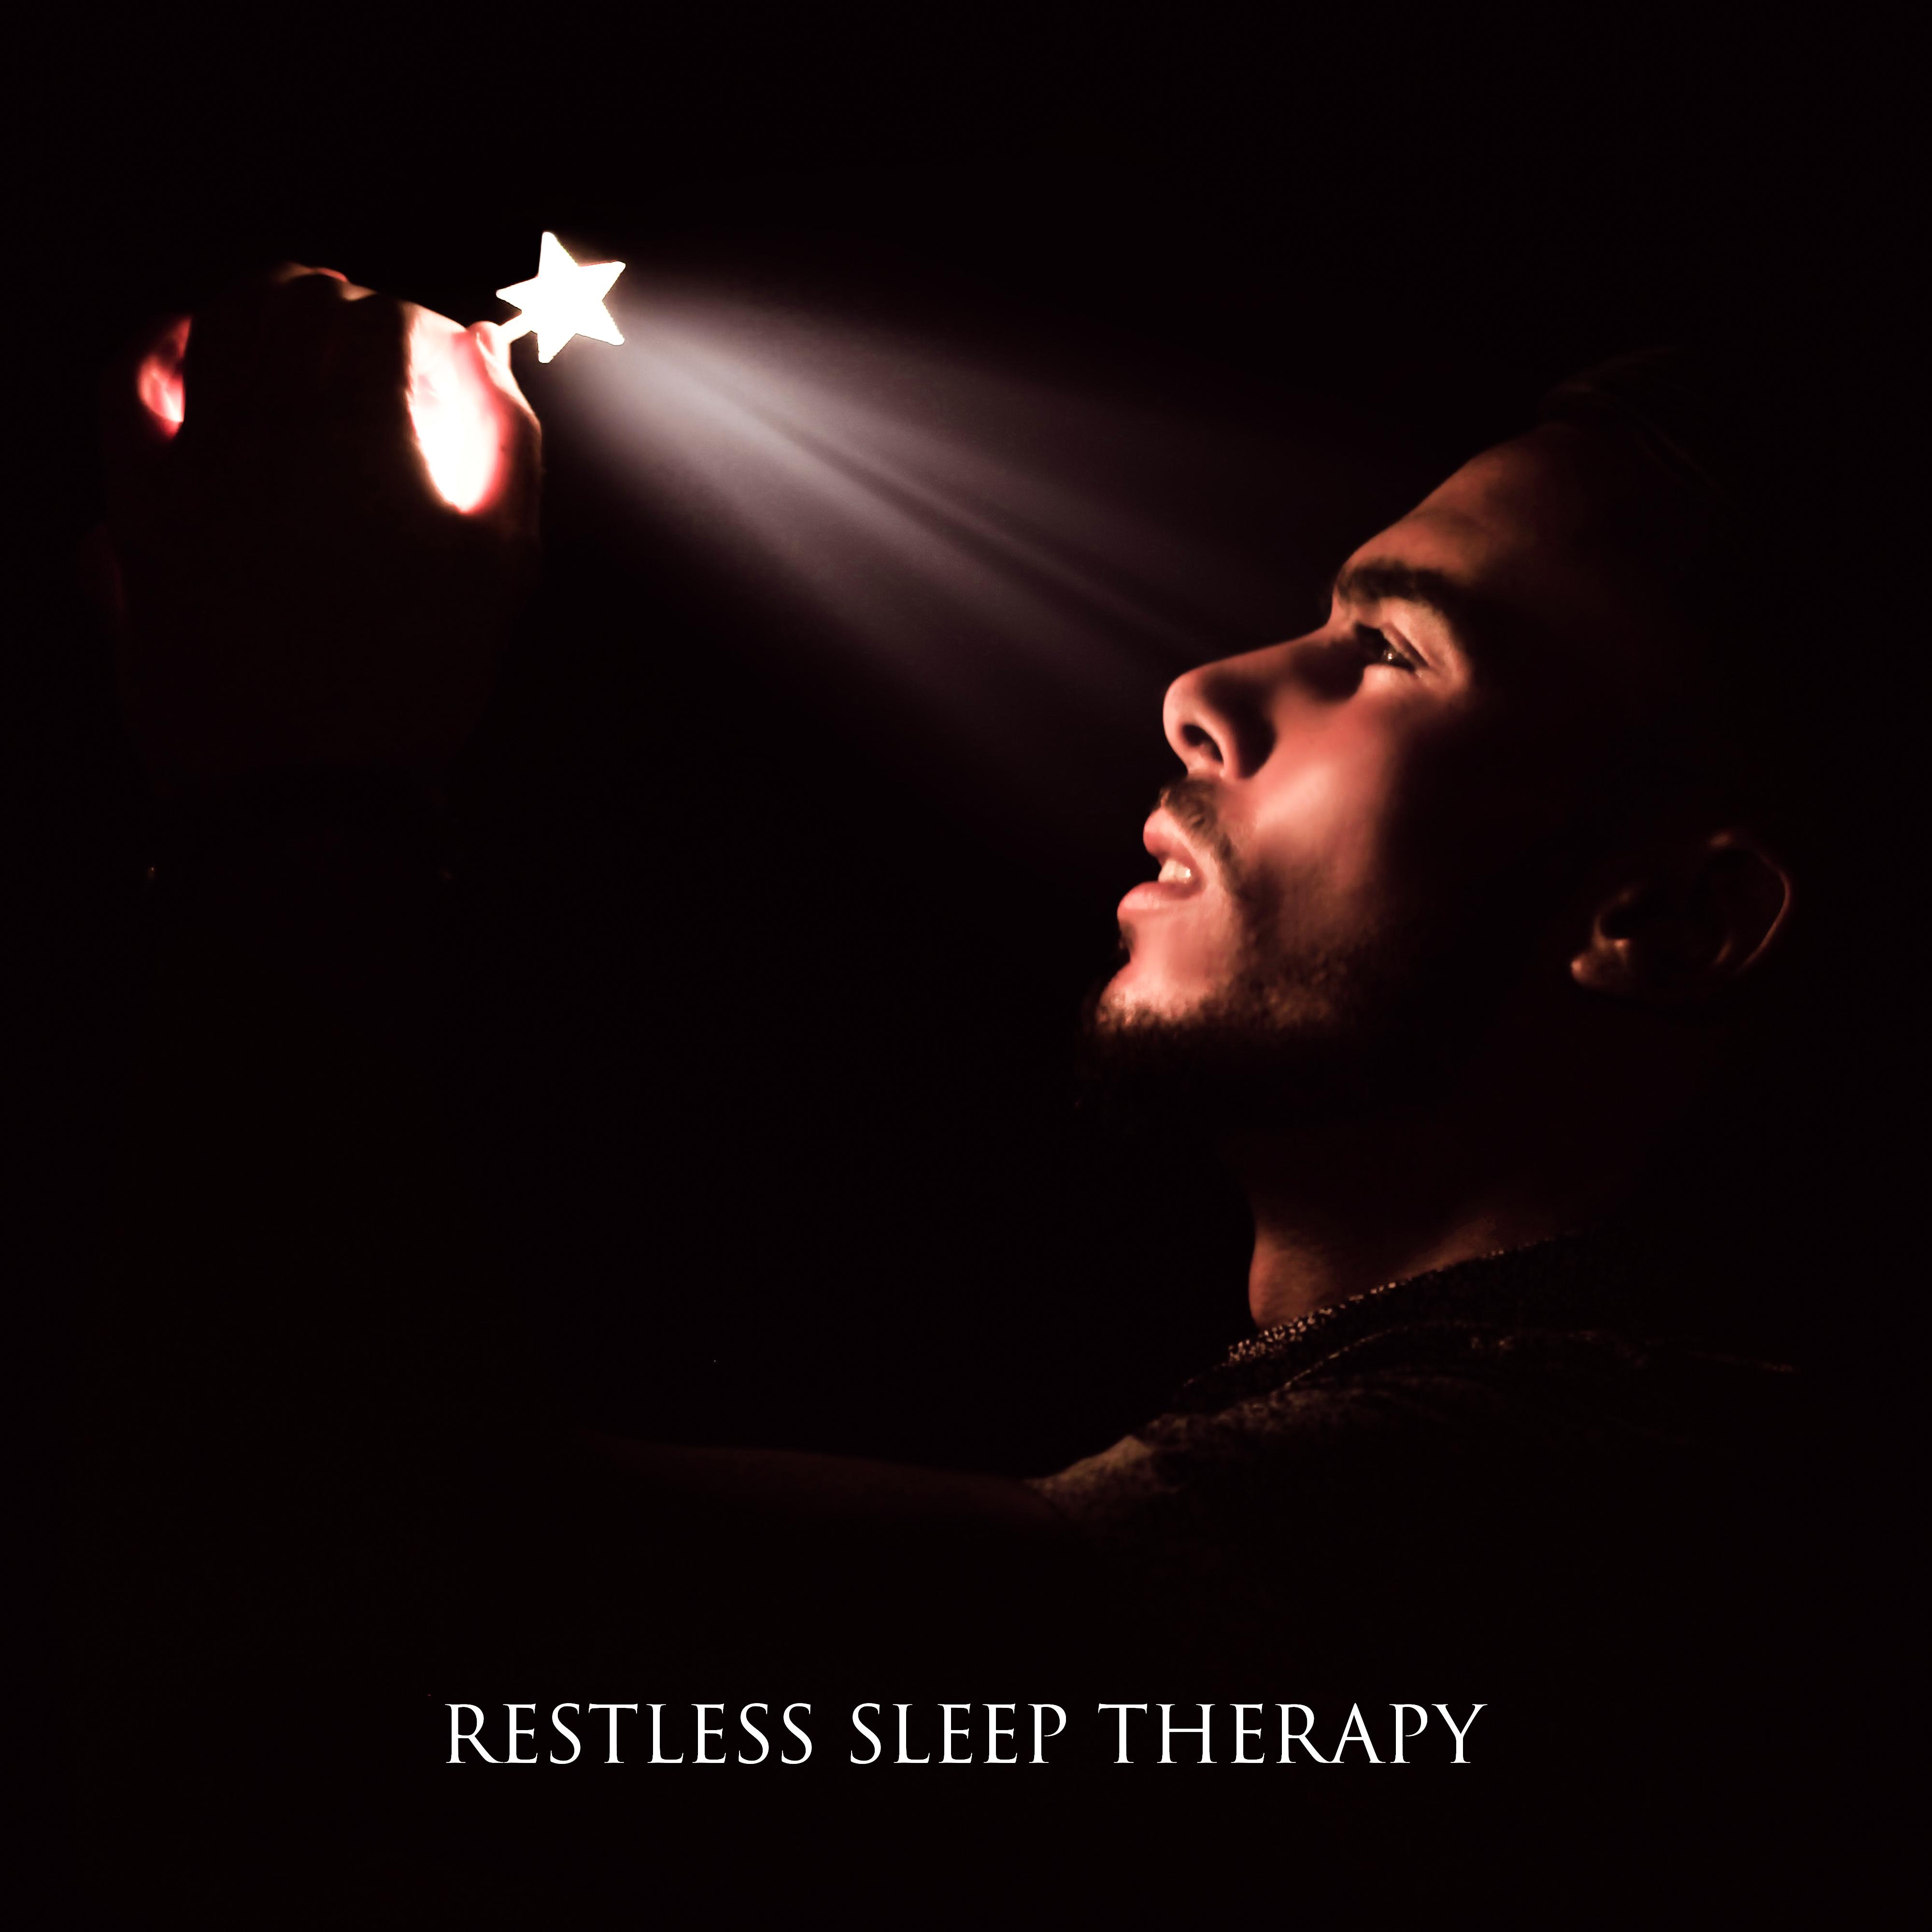 Restless Sleep Therapy – Therapy Music for Restless Sleep, Cure Insomnia, Relief Stress, Reduce Anxiety, Deep Sleep